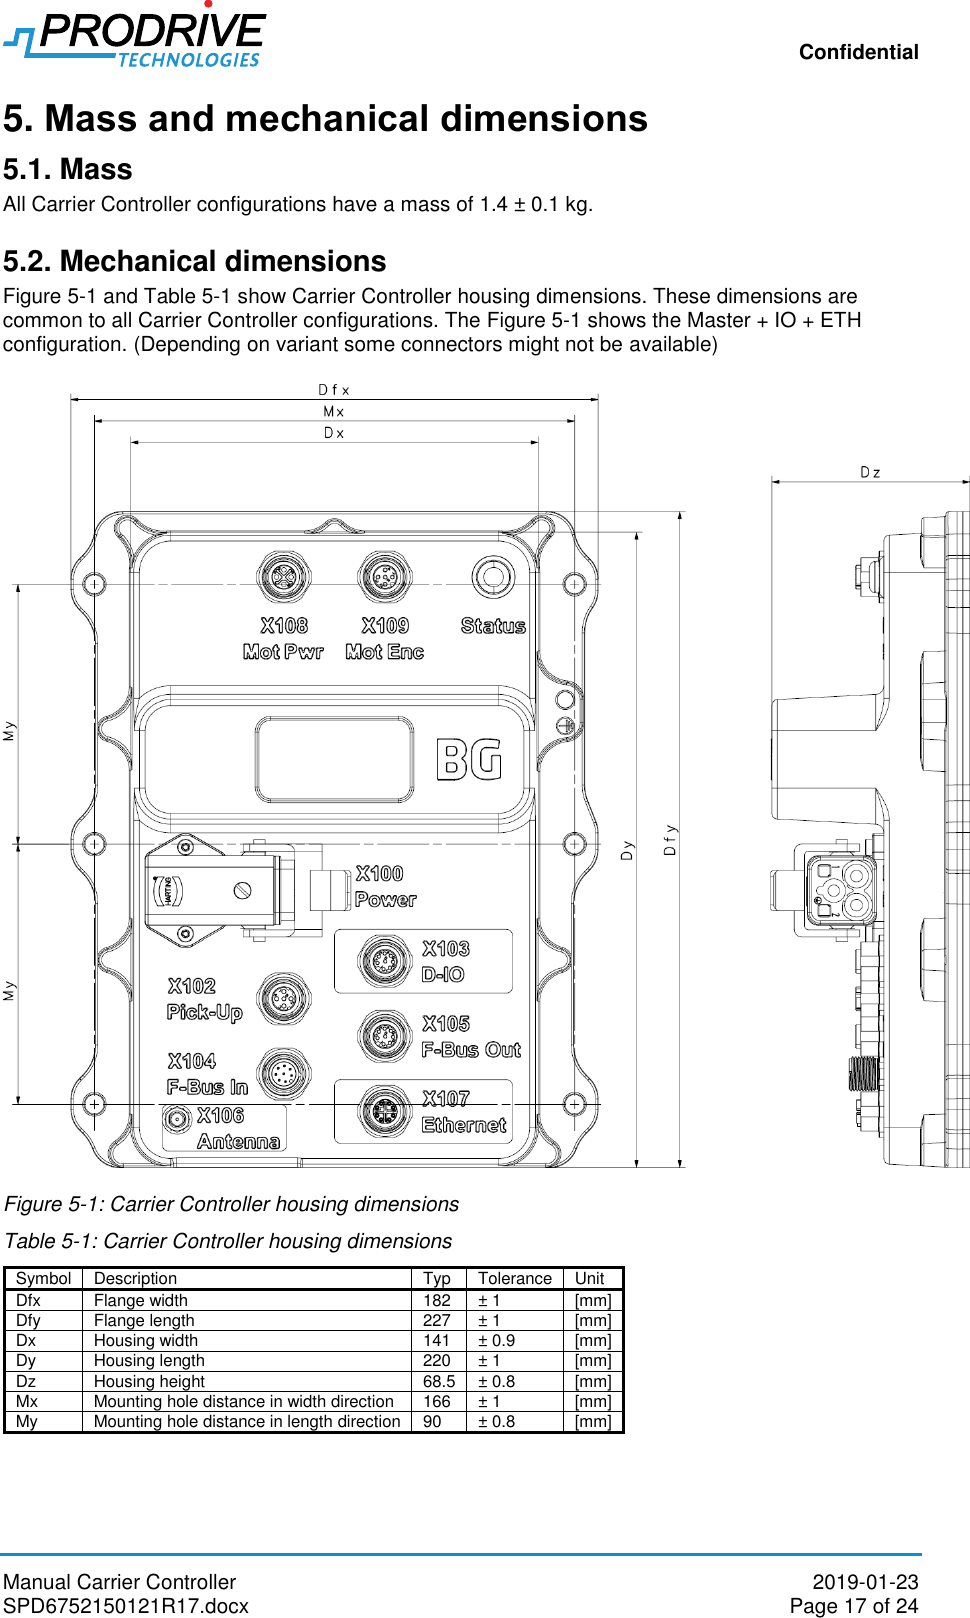 Confidential Manual Carrier Controller  2019-01-23 SPD6752150121R17.docx  Page 17 of 24 5. Mass and mechanical dimensions 5.1. Mass All Carrier Controller configurations have a mass of 1.4 ± 0.1 kg.  5.2. Mechanical dimensions Figure 5-1 and Table 5-1 show Carrier Controller housing dimensions. These dimensions are common to all Carrier Controller configurations. The Figure 5-1 shows the Master + IO + ETH configuration. (Depending on variant some connectors might not be available)   Figure 5-1: Carrier Controller housing dimensions Table 5-1: Carrier Controller housing dimensions Symbol Description Typ Tolerance Unit Dfx Flange width 182 ± 1 [mm] Dfy Flange length 227 ± 1 [mm] Dx Housing width 141 ± 0.9 [mm] Dy Housing length 220 ± 1 [mm] Dz Housing height 68.5 ± 0.8 [mm] Mx Mounting hole distance in width direction 166 ± 1 [mm] My Mounting hole distance in length direction 90 ± 0.8 [mm]    